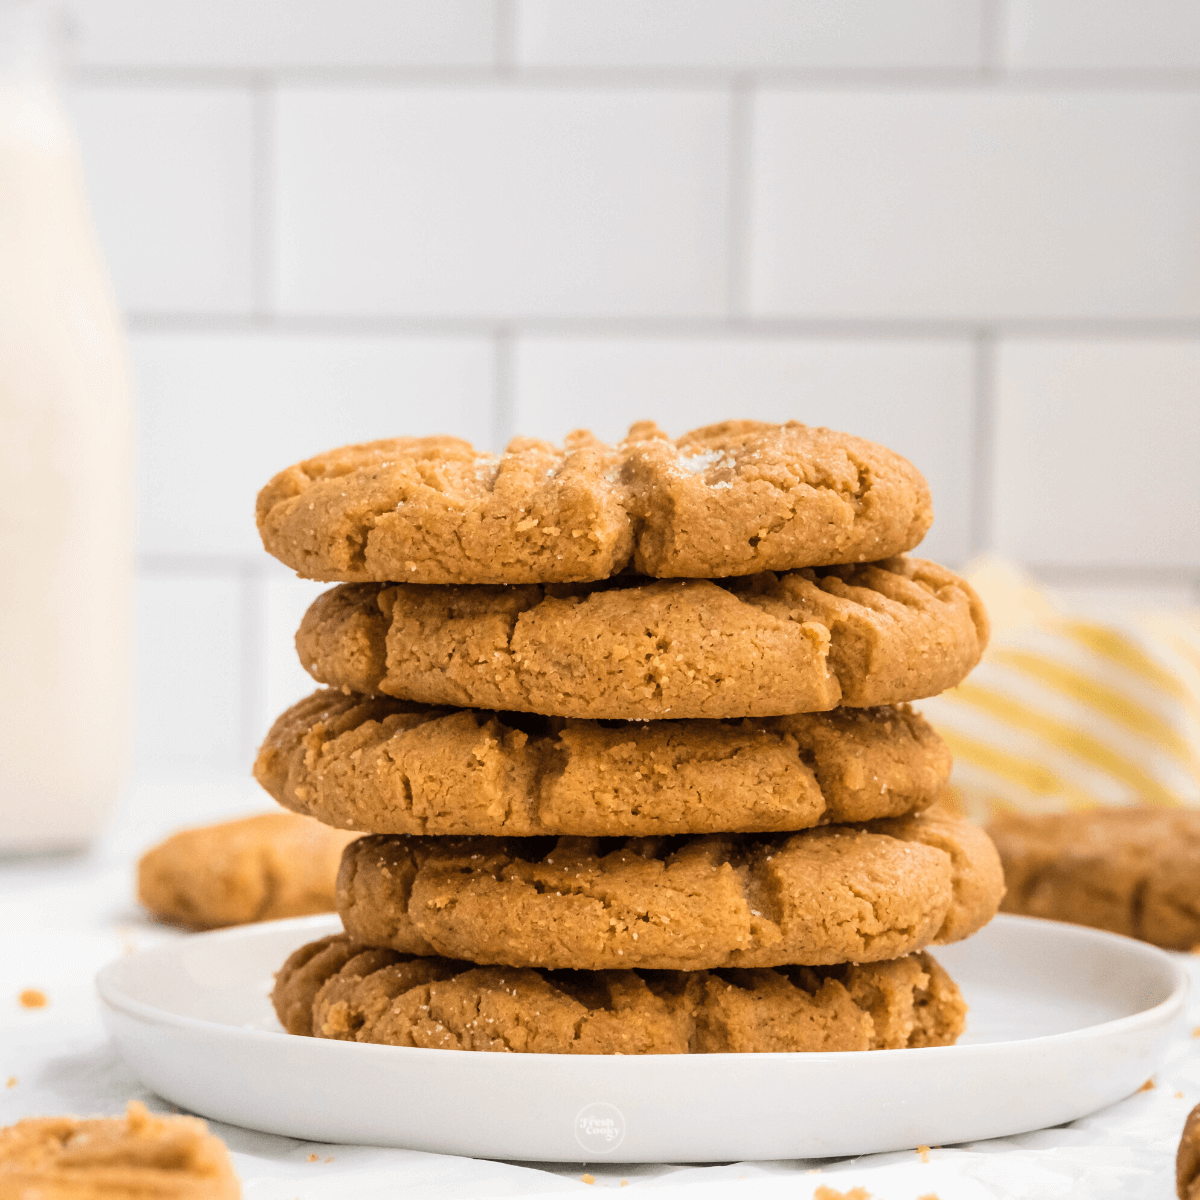 Peanut Butter cookies stacked on plate with glass of milk in background.